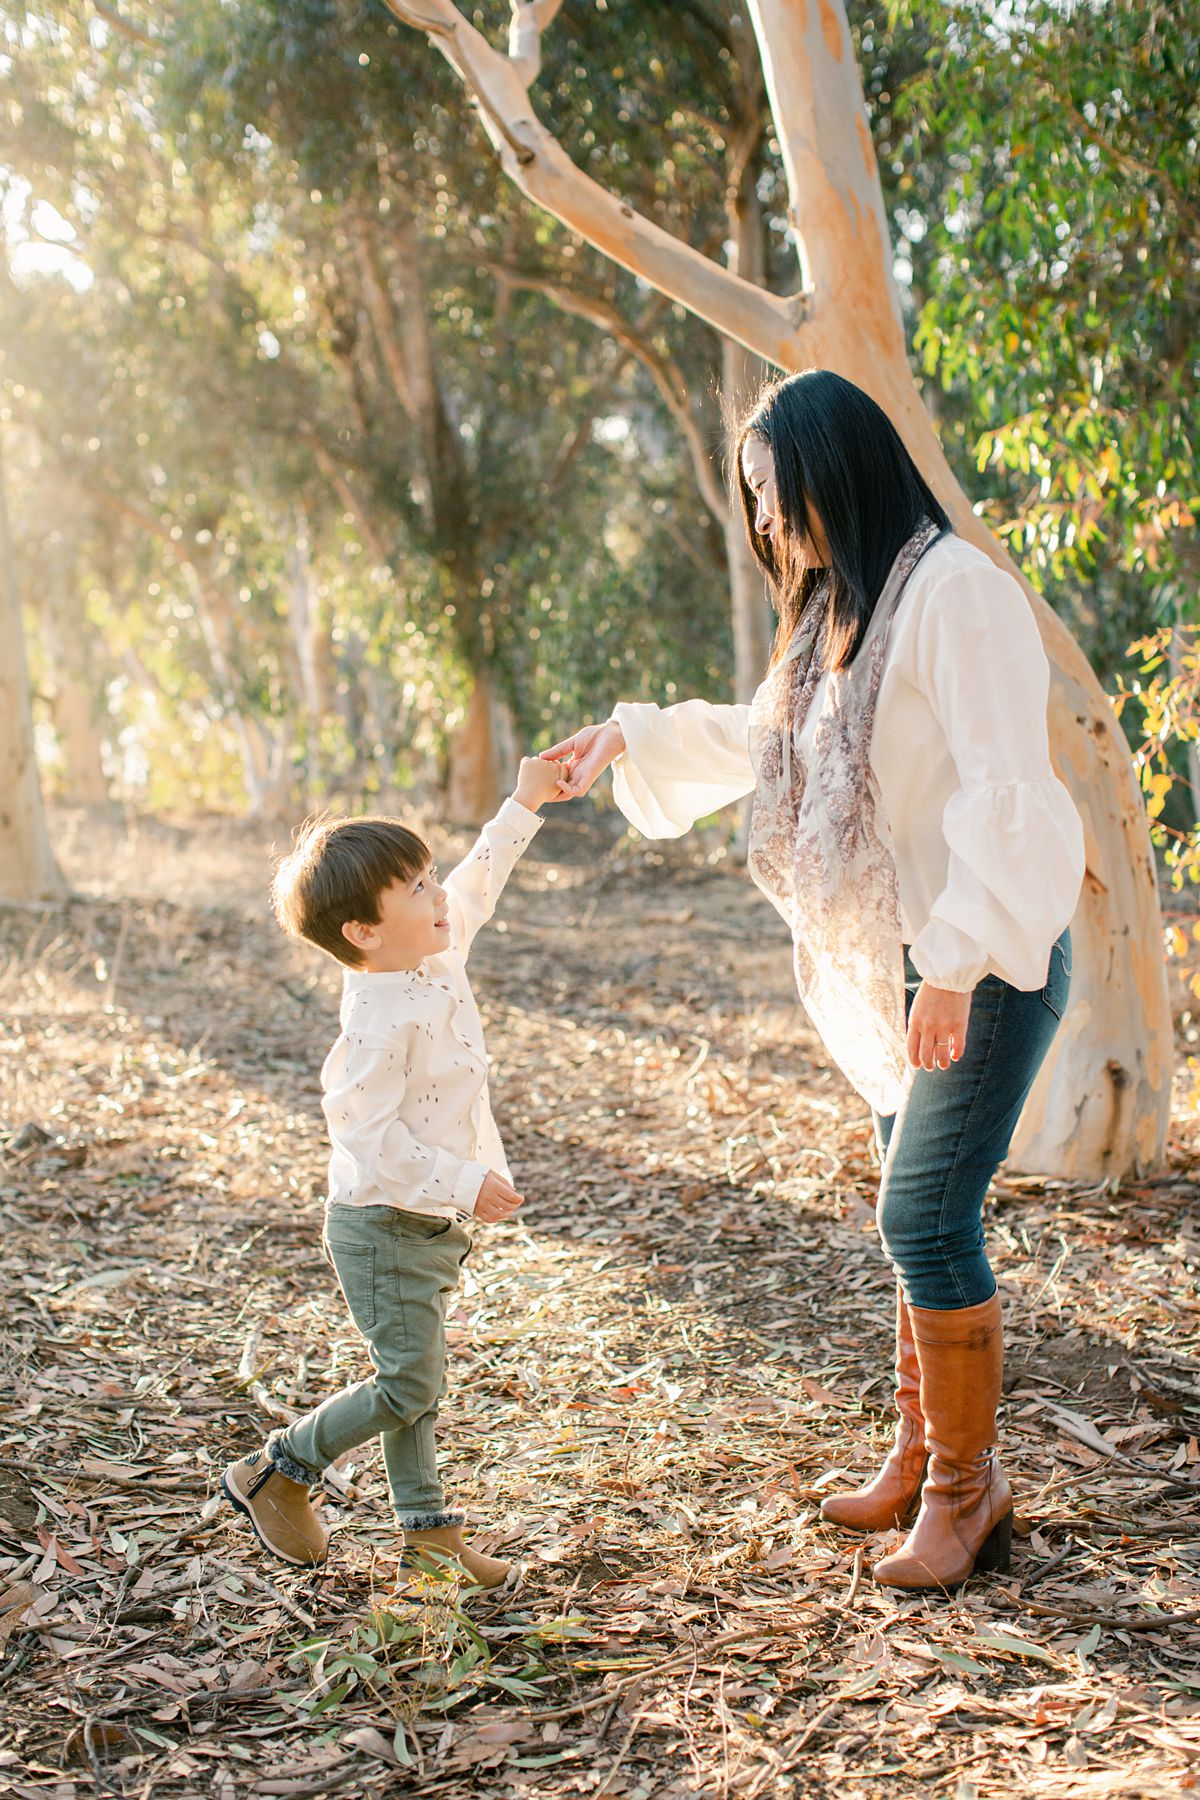 a mom and son dancing wearing white shirt in the forest. Sunset golden hour.